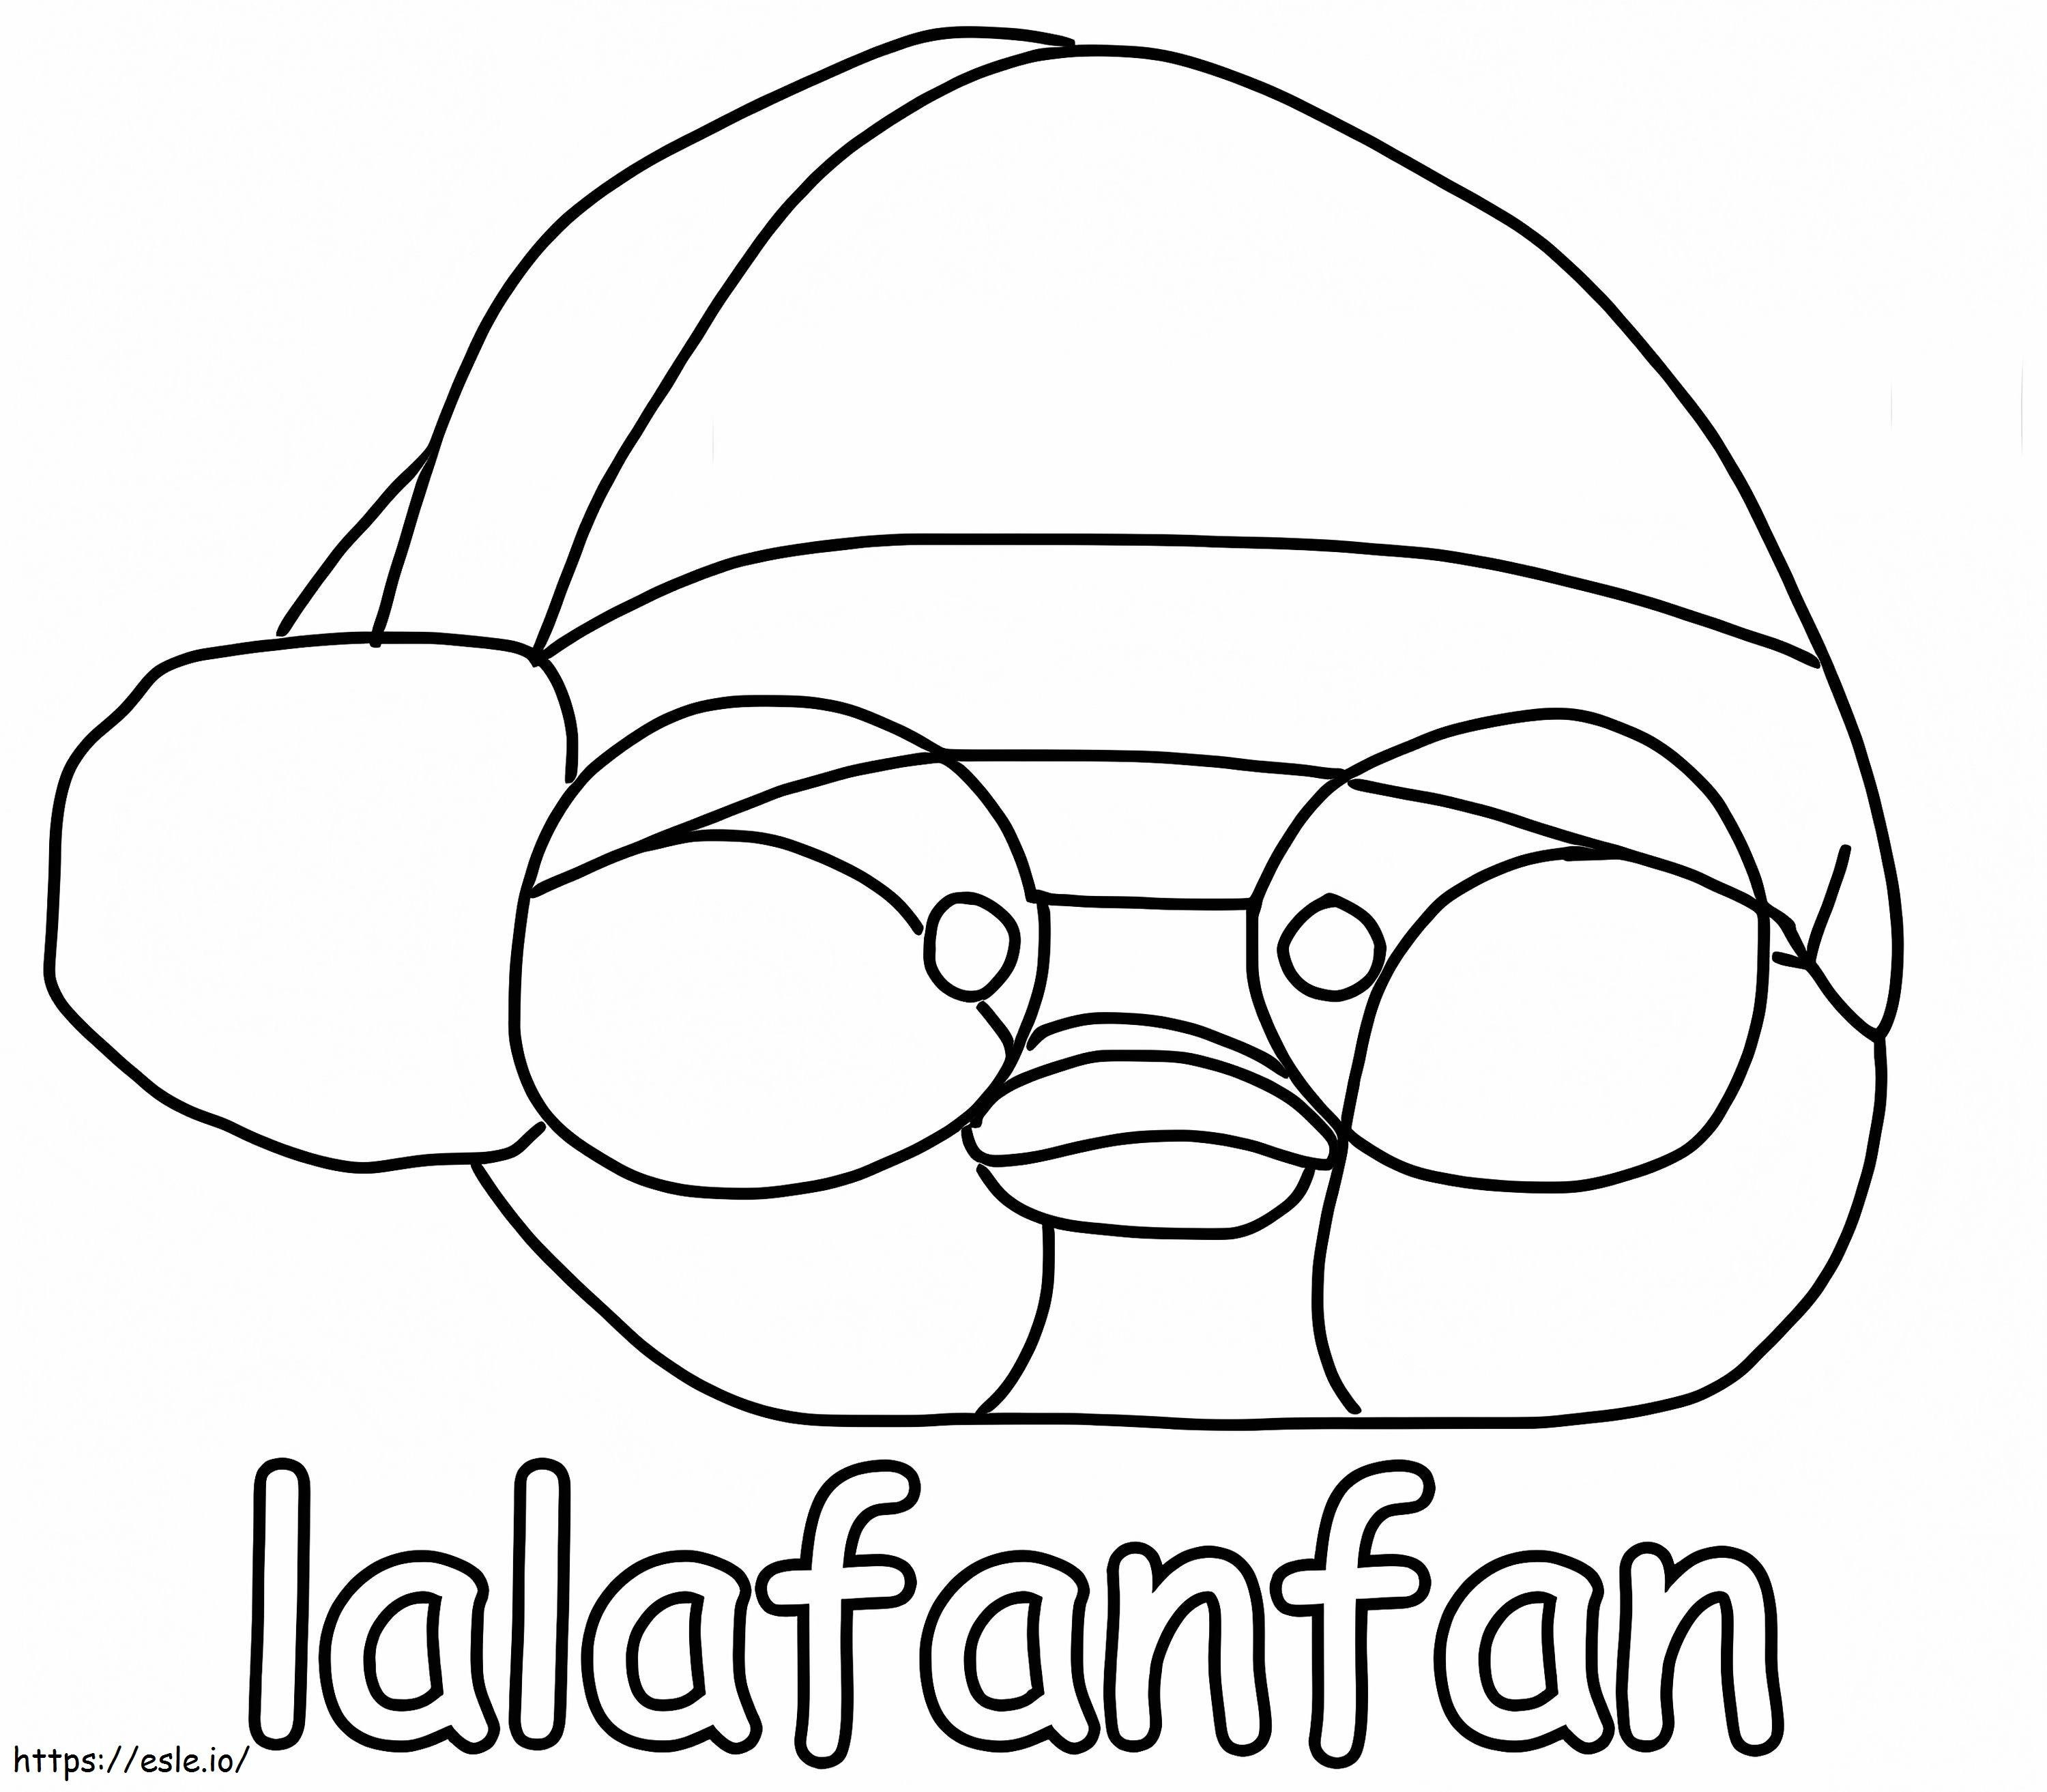 Free Lalafanfan coloring page